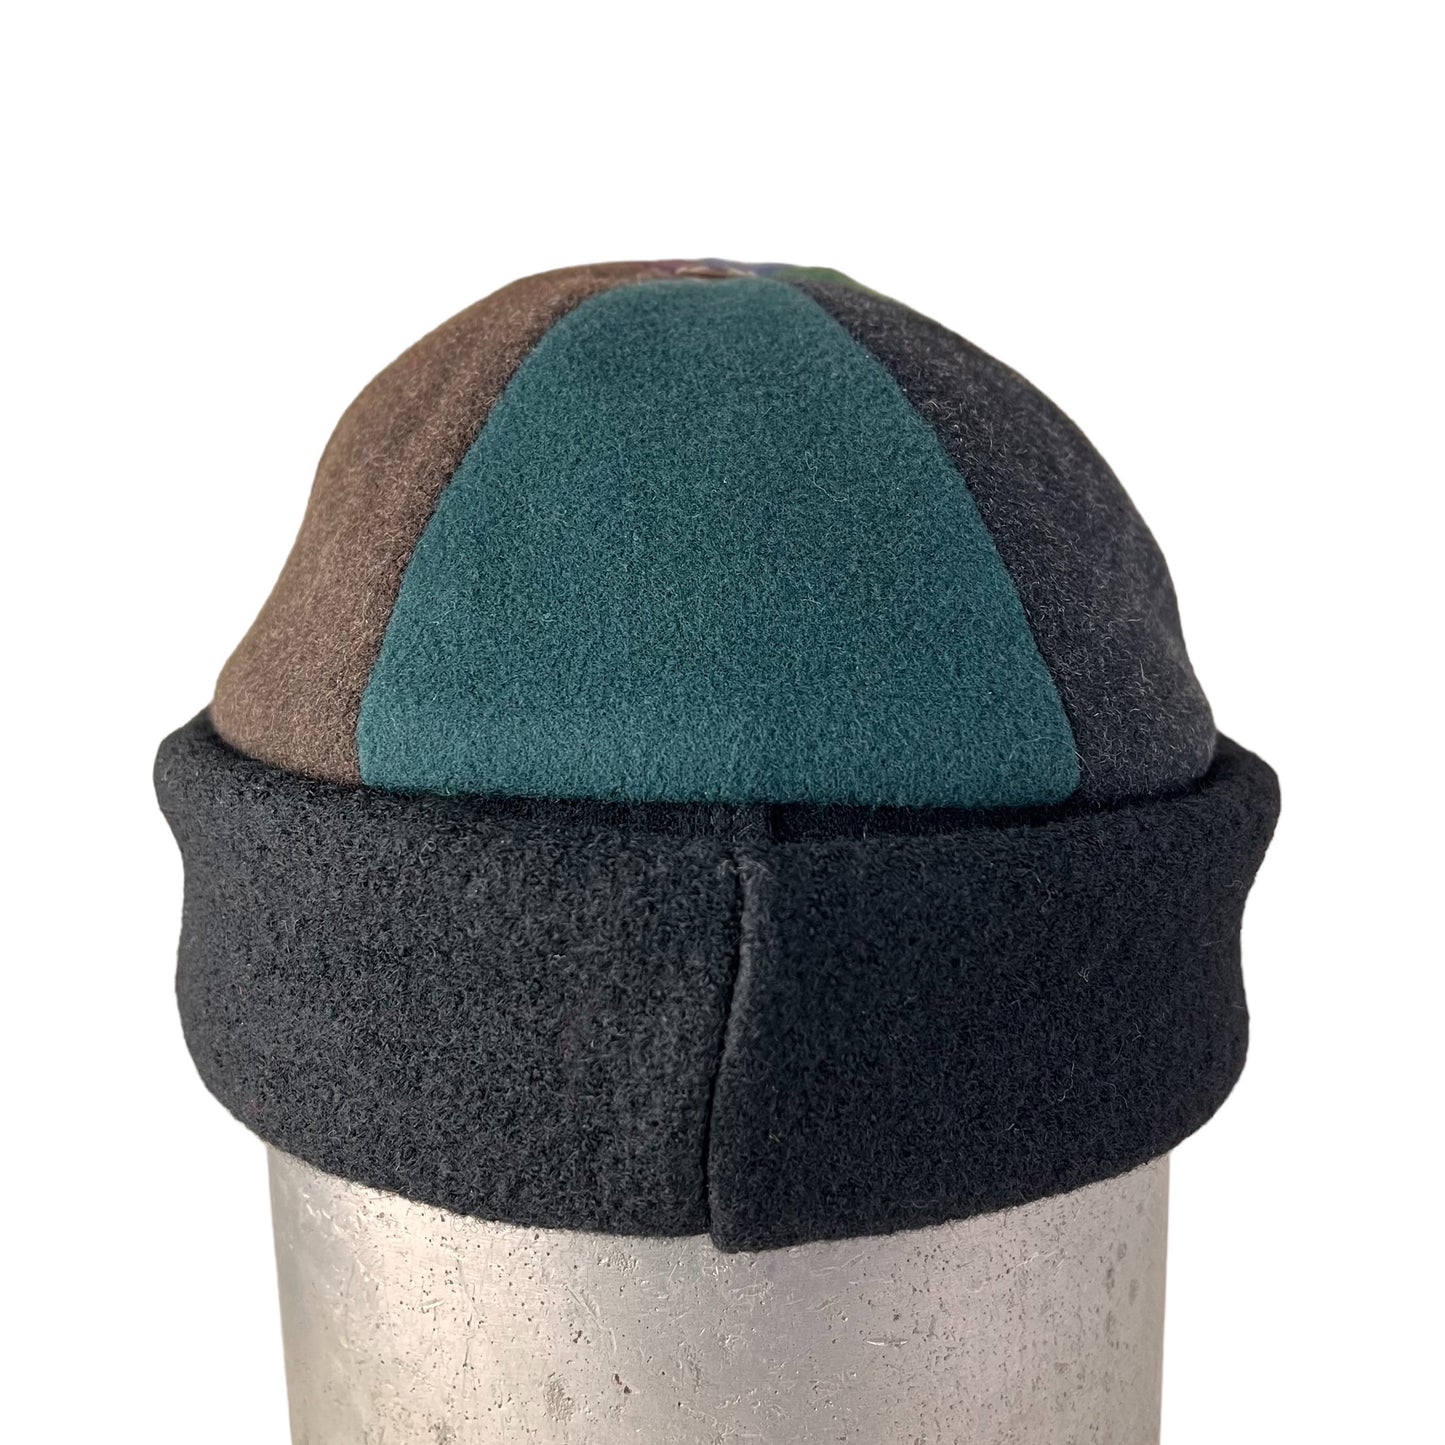 Beanie Wool Cap Slouchy Toque Large Blue Brown Green and Black